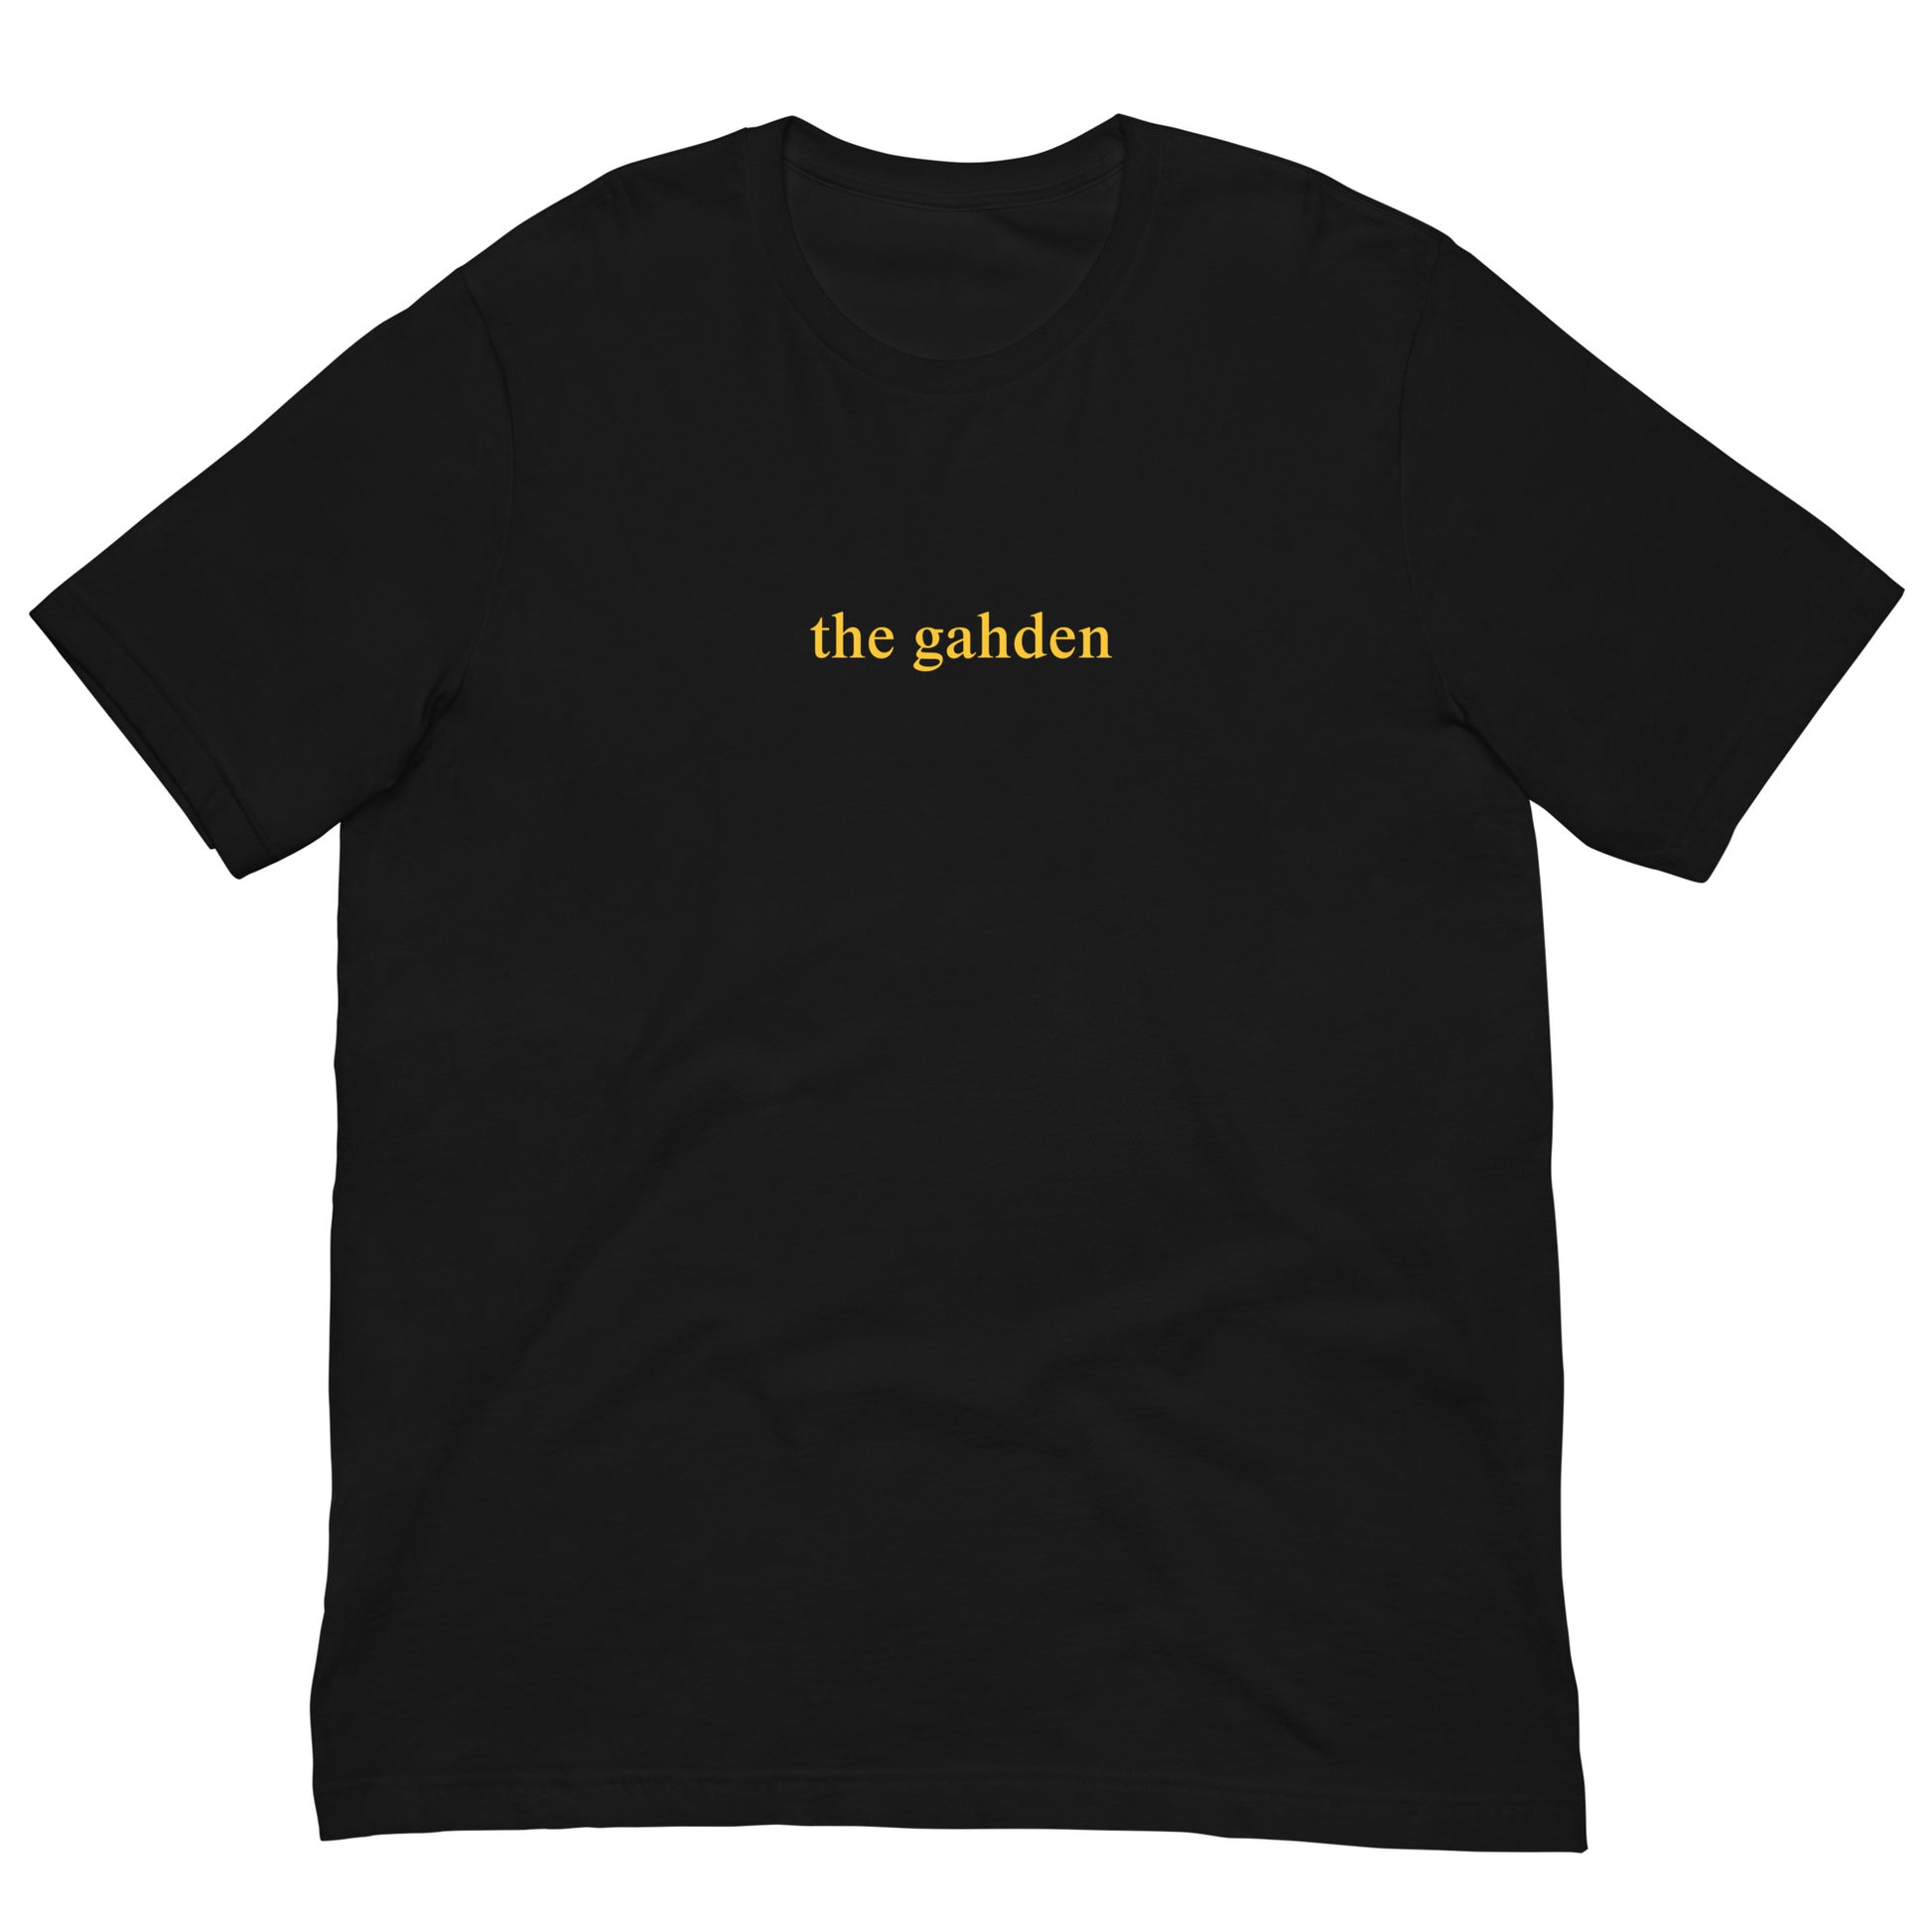 black tshirt that says "the gahden" in gold lettering